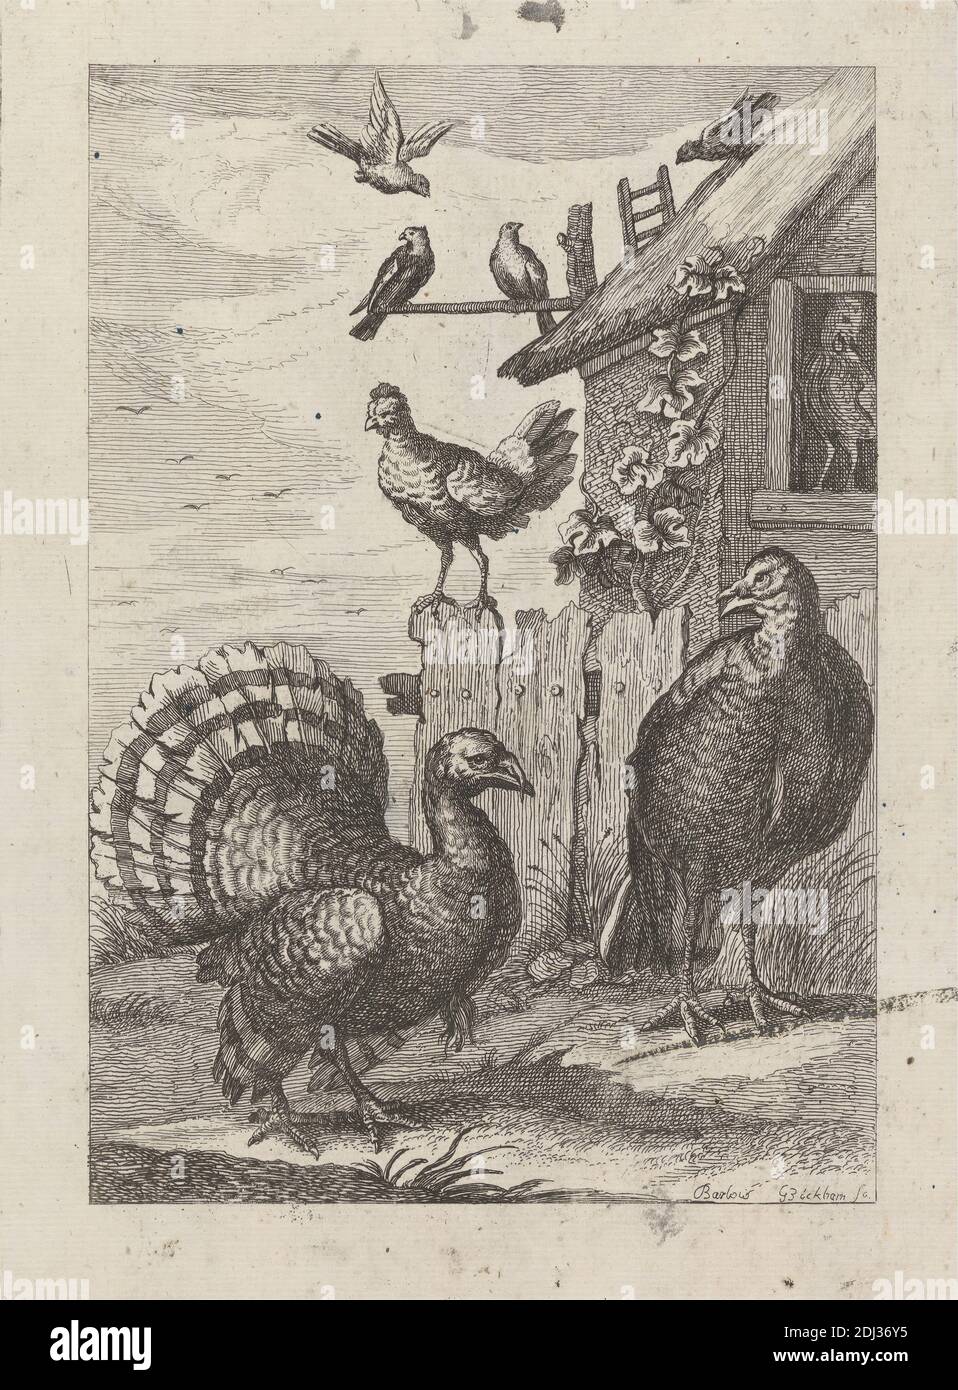 Two Turkeys, two hens and four doves a plate for 'A New Drawing Book...of Various Kinds of Birds, Drawn from the Life by Mr. Francis Barlow' 1731 (1 of 9), Print made by George Bickham, 1683/4–1758, British, after Francis Barlow, ca. 1626–1704, British, Published by Henry Overton, 1675/6–1751, British, 1731, Etching on medium, smooth, cream laid paper, Sheet: 11 5/16 x 7 5/16 inches (28.8 x 18.6 cm), Plate: 8 7/16 x 6 1/8 inches (21.4 x 15.5 cm), and Image: 7 1/4 x 5 inches (18.4 x 12.7 cm), animal art, birds, chickens, doves, farm, fences, grass, hen house, ladder, rooster, turkeys (birds Stock Photo